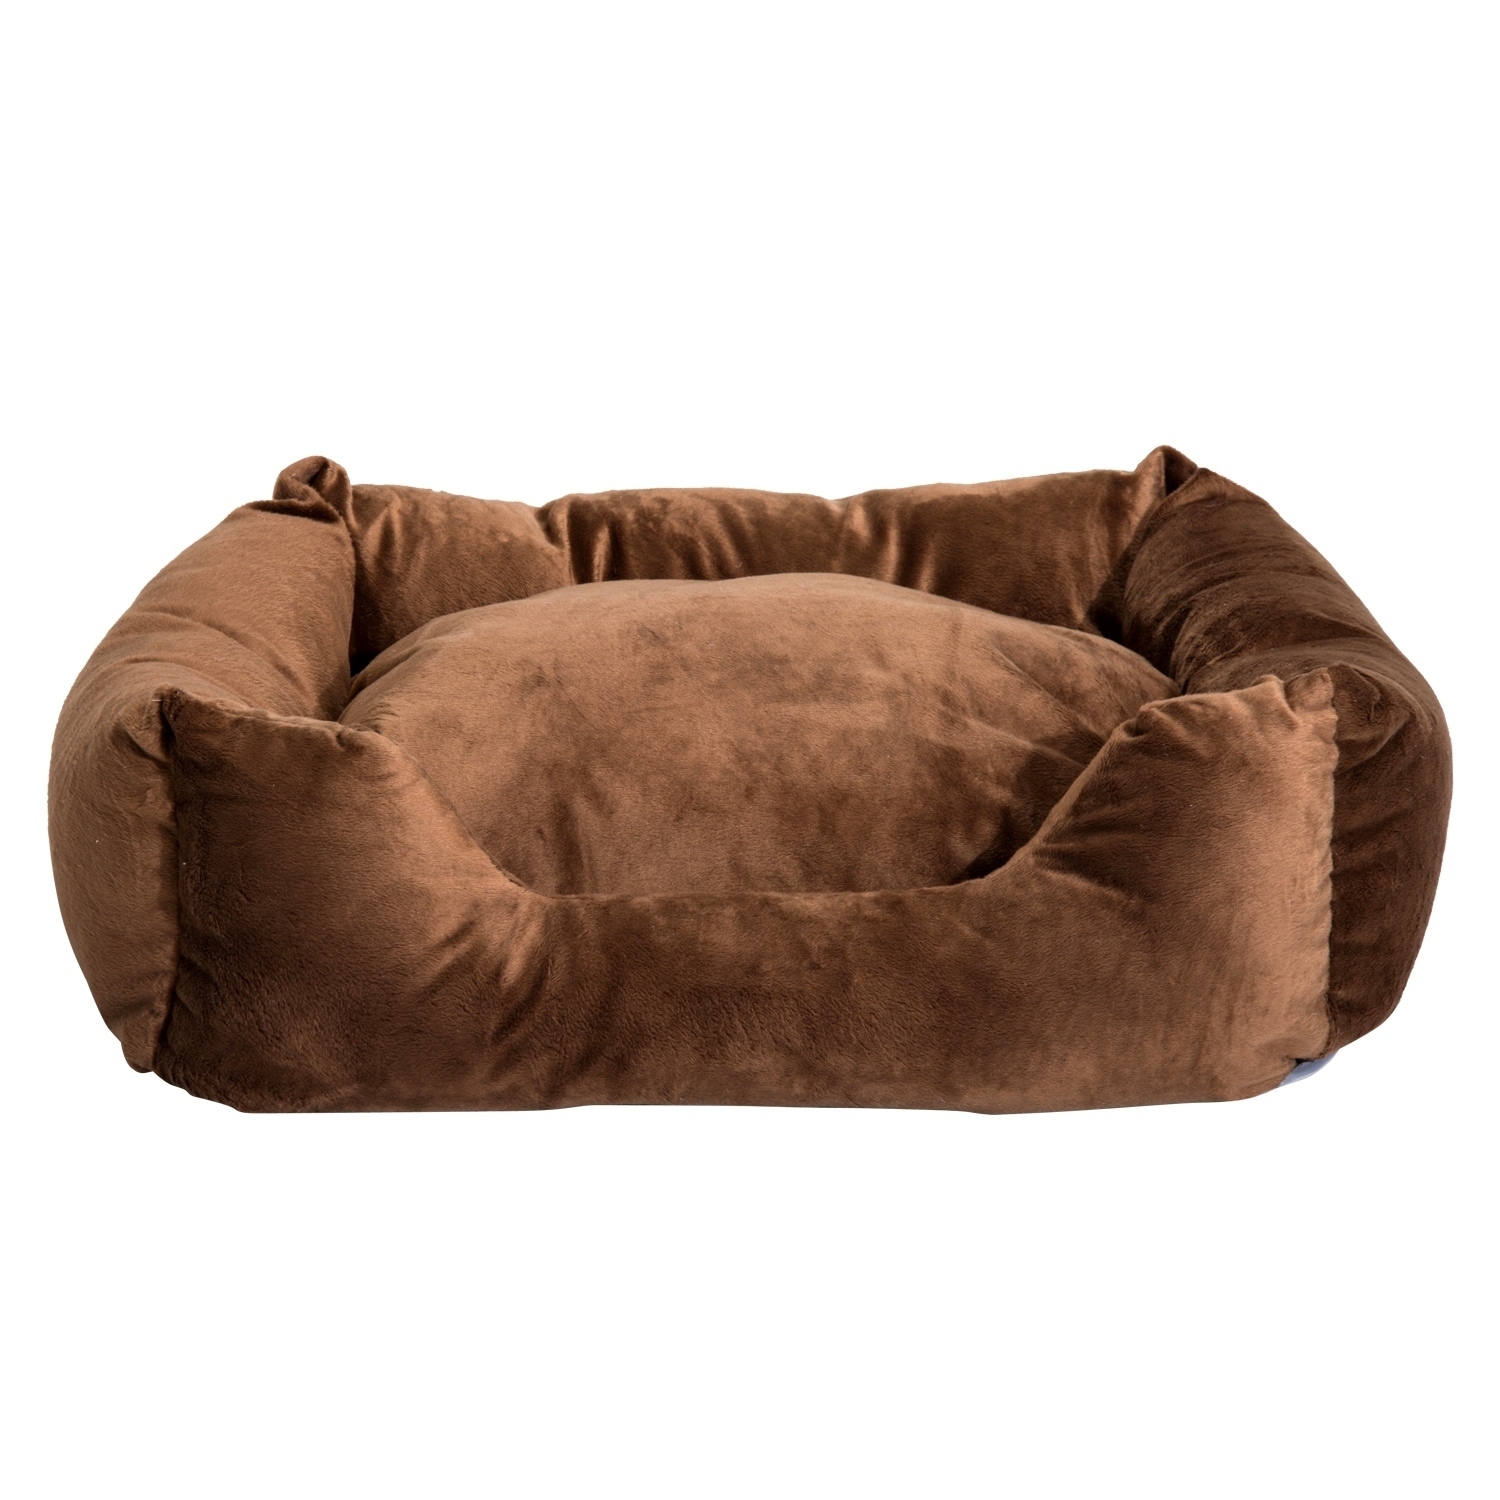 electric dog bed